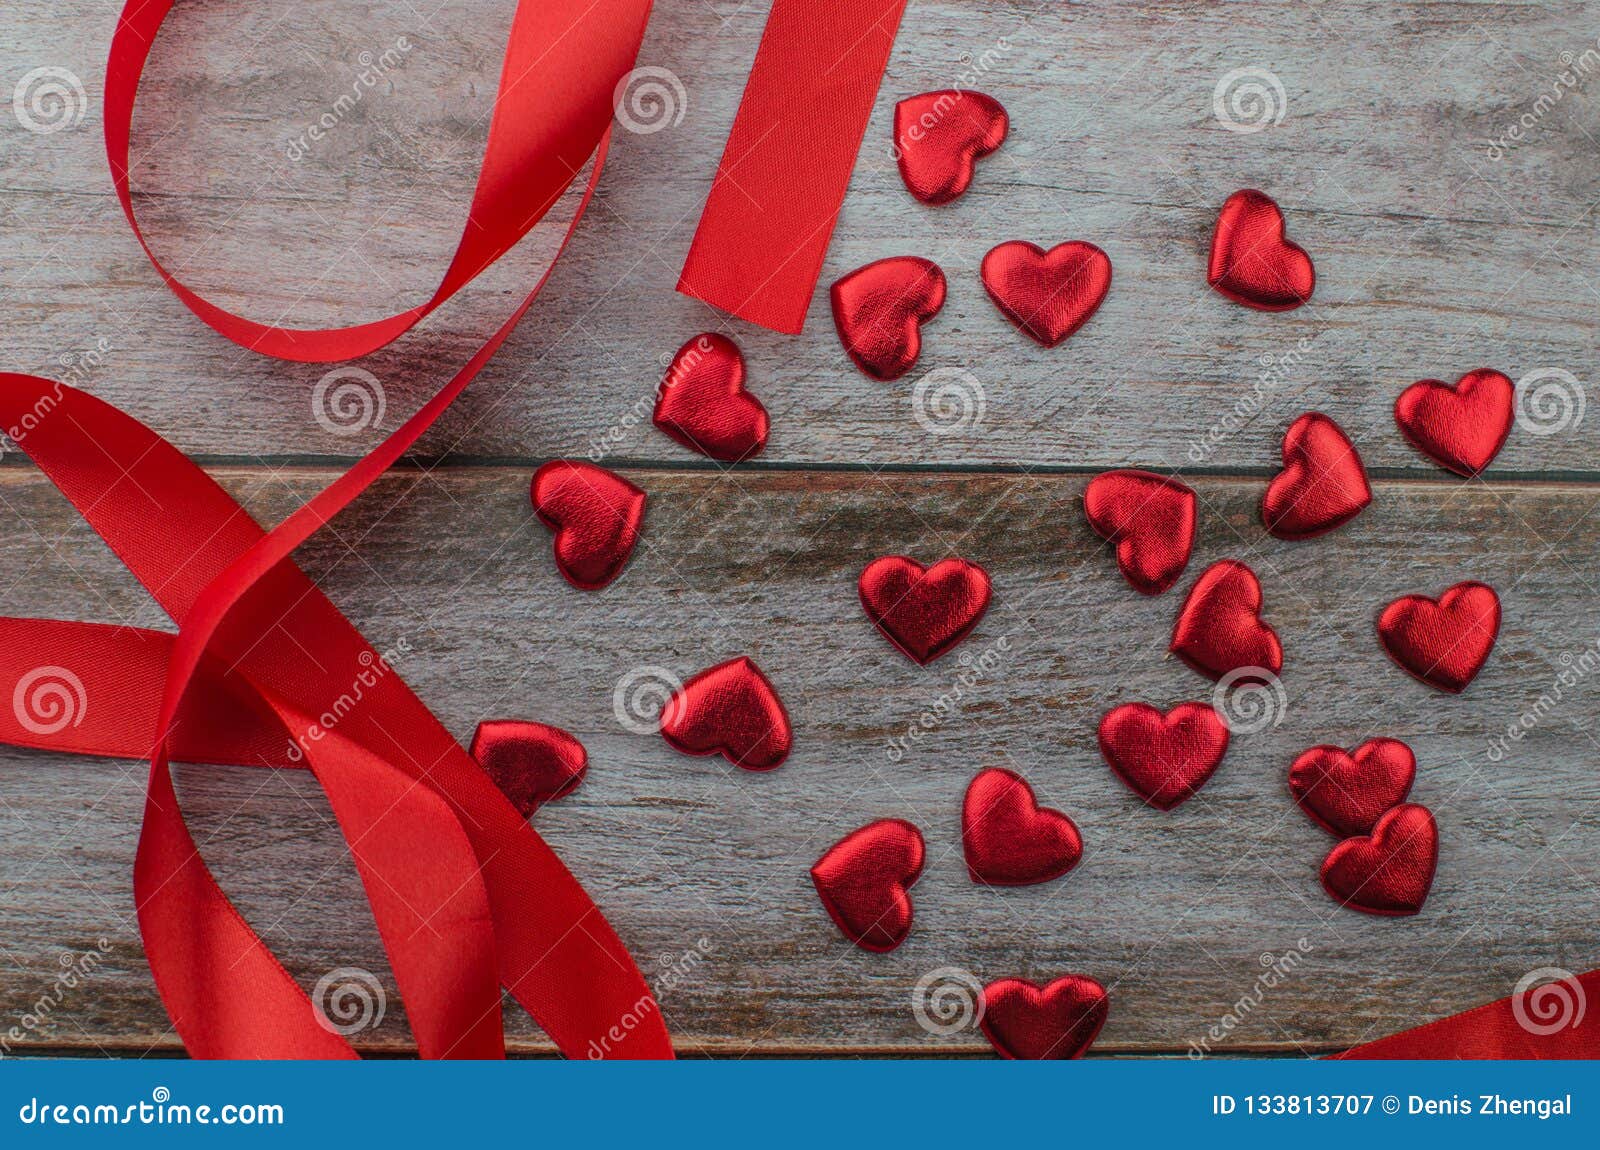 Ribbons Shaped As Hearts on White, Valentines Day Concept Stock Image ...